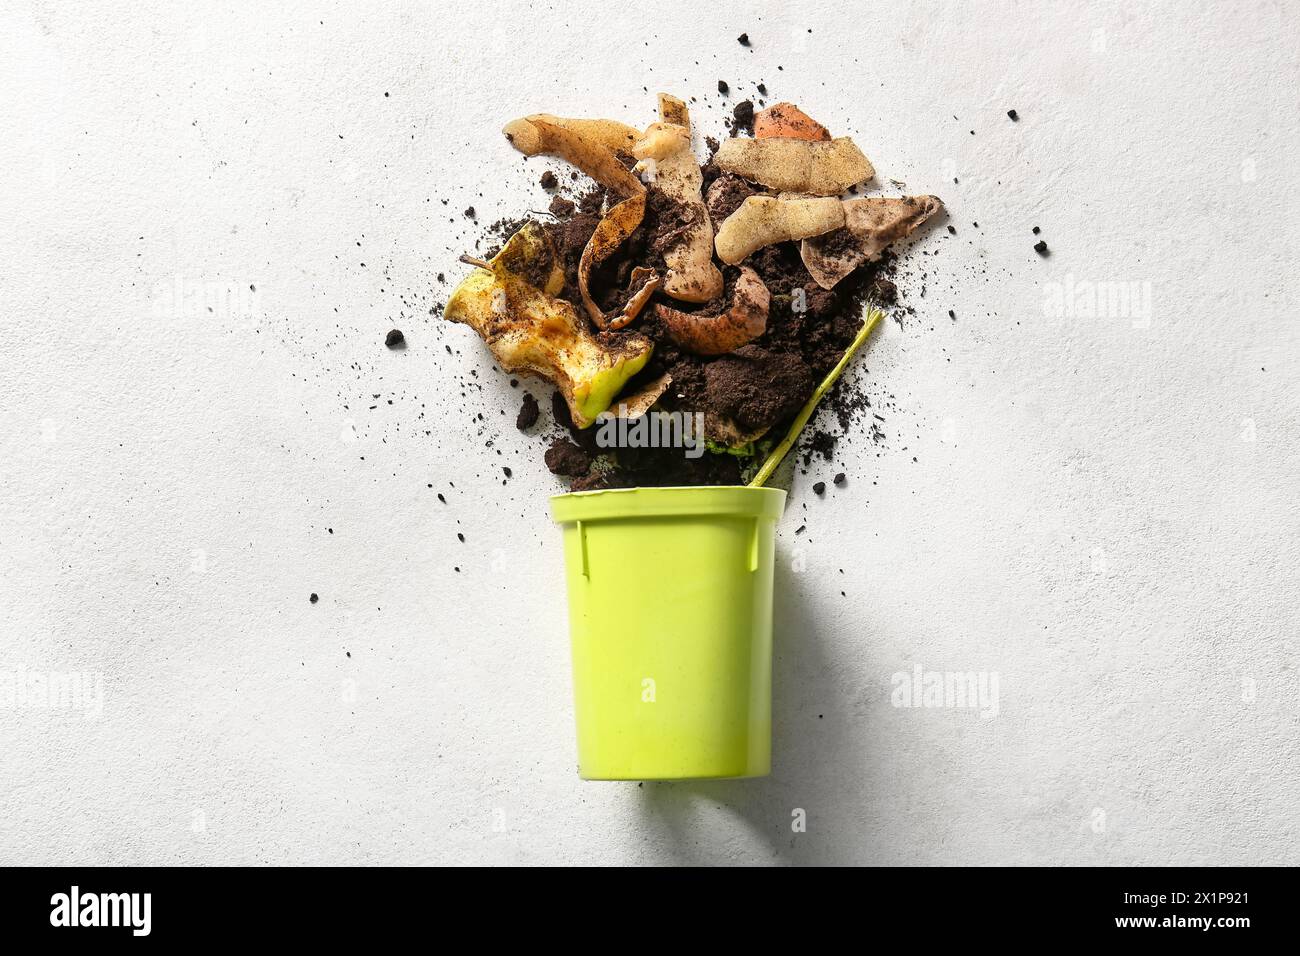 Bin with organic waste and soil on white grunge background. Compost recycling concept Stock Photo